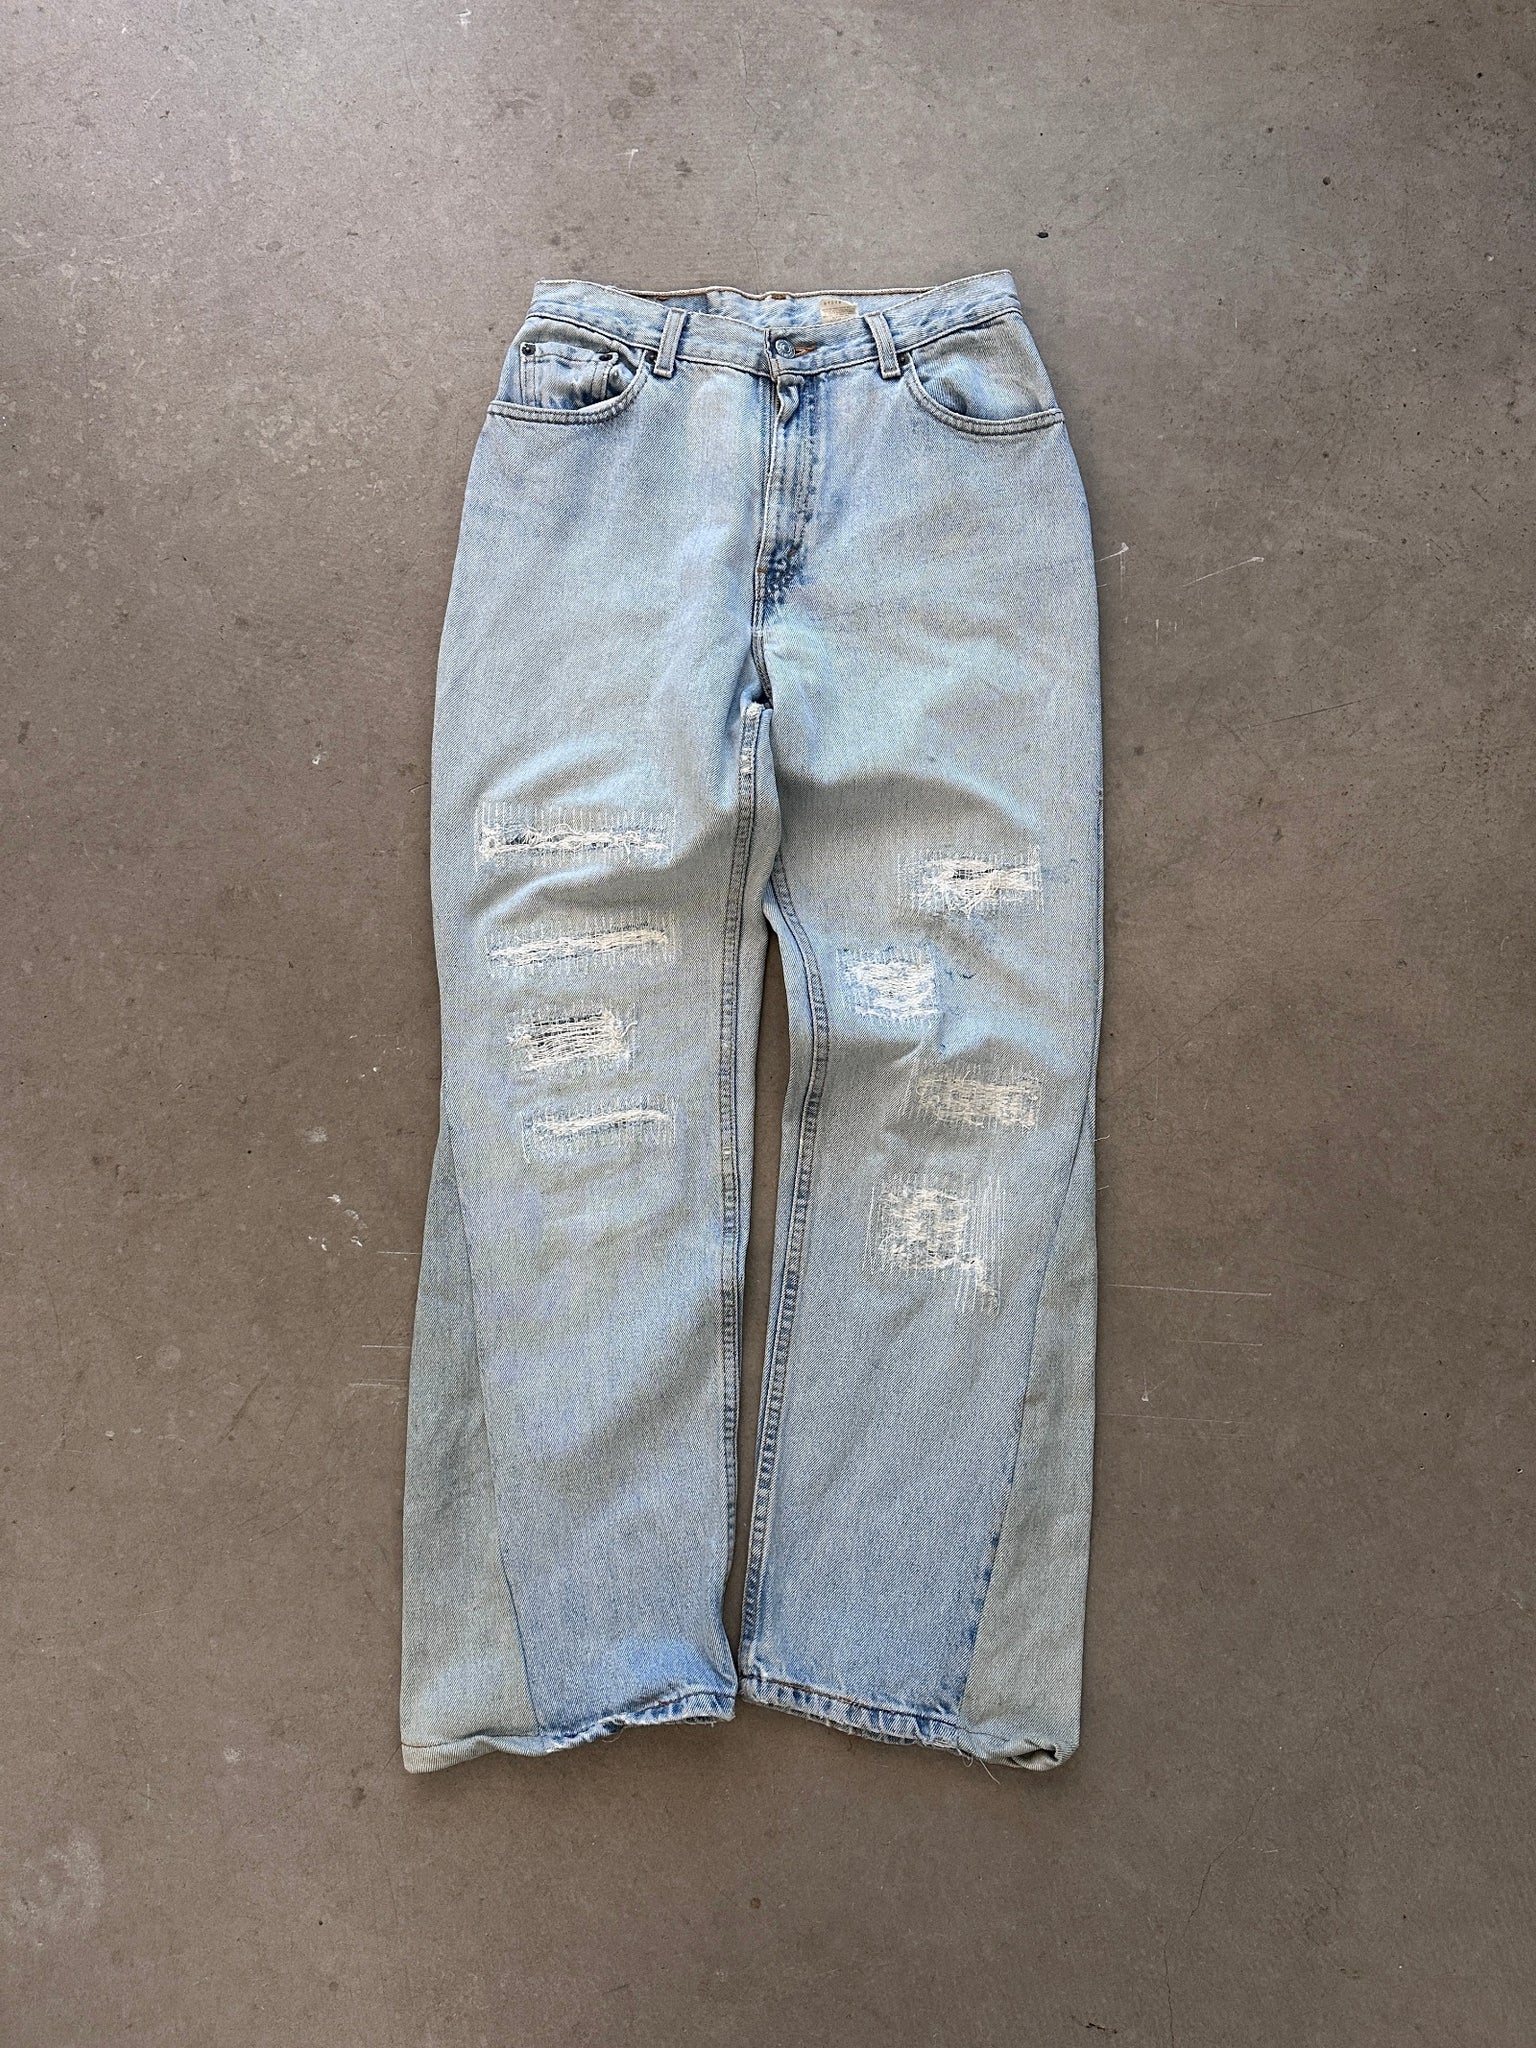 2001 Levi's 550 Repaired Jeans - 29 x 31